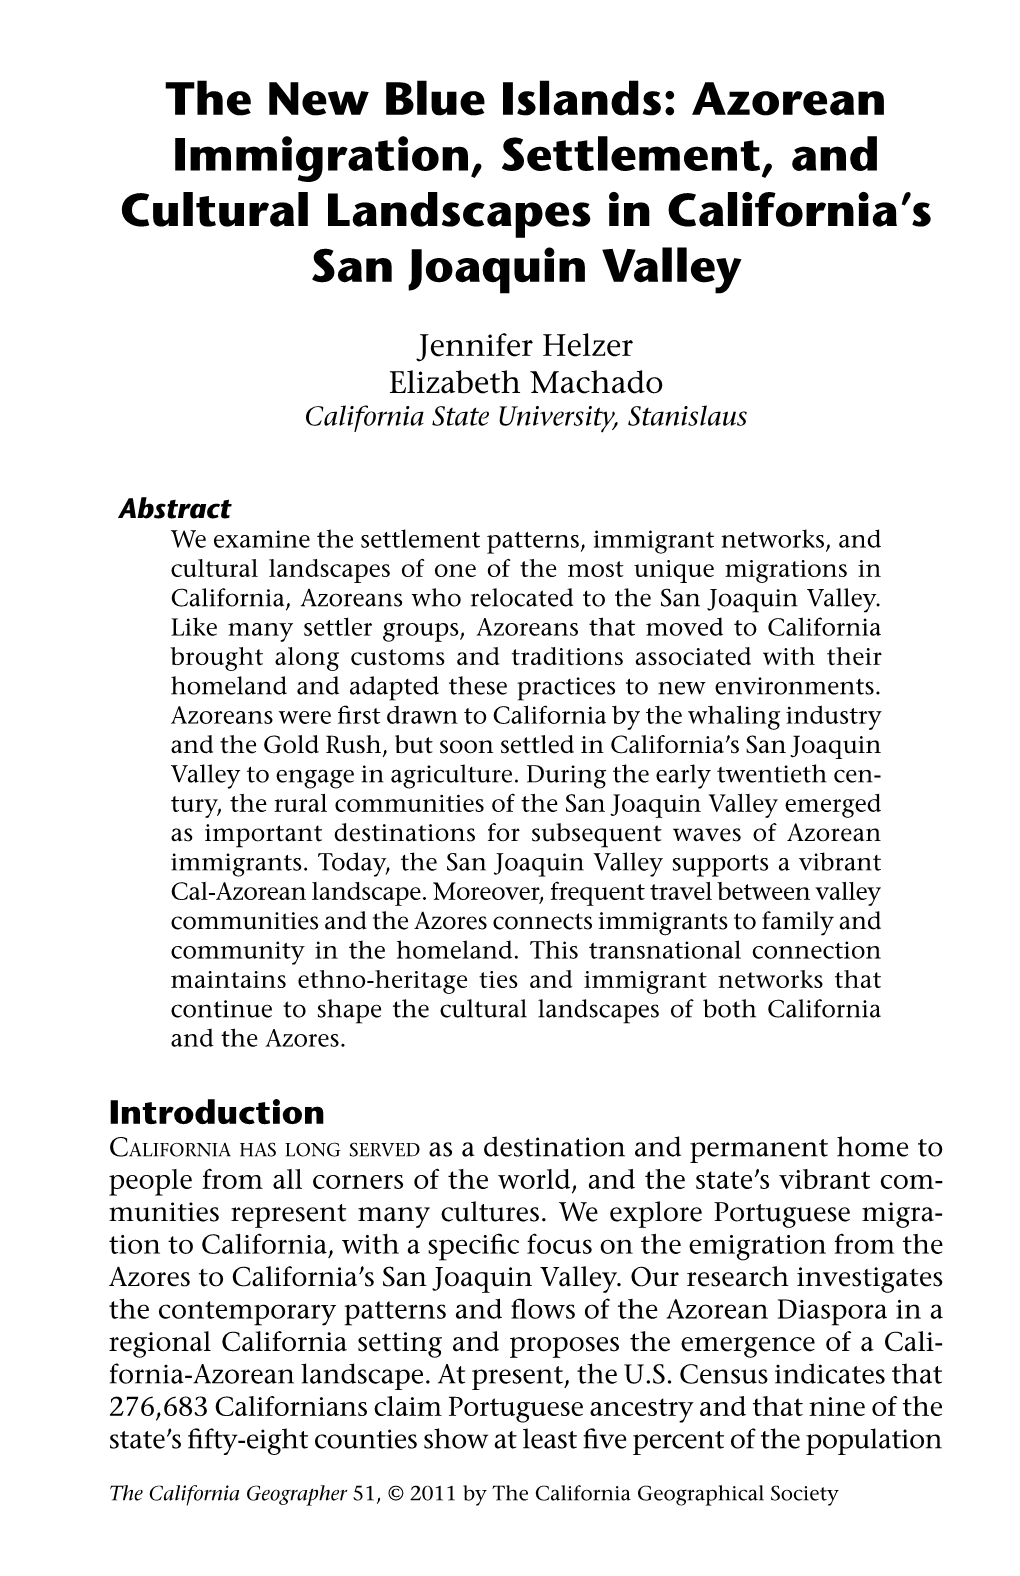 Azorean Immigration, Settlement, and Cultural Landscapes in California's San Joaquin Valley